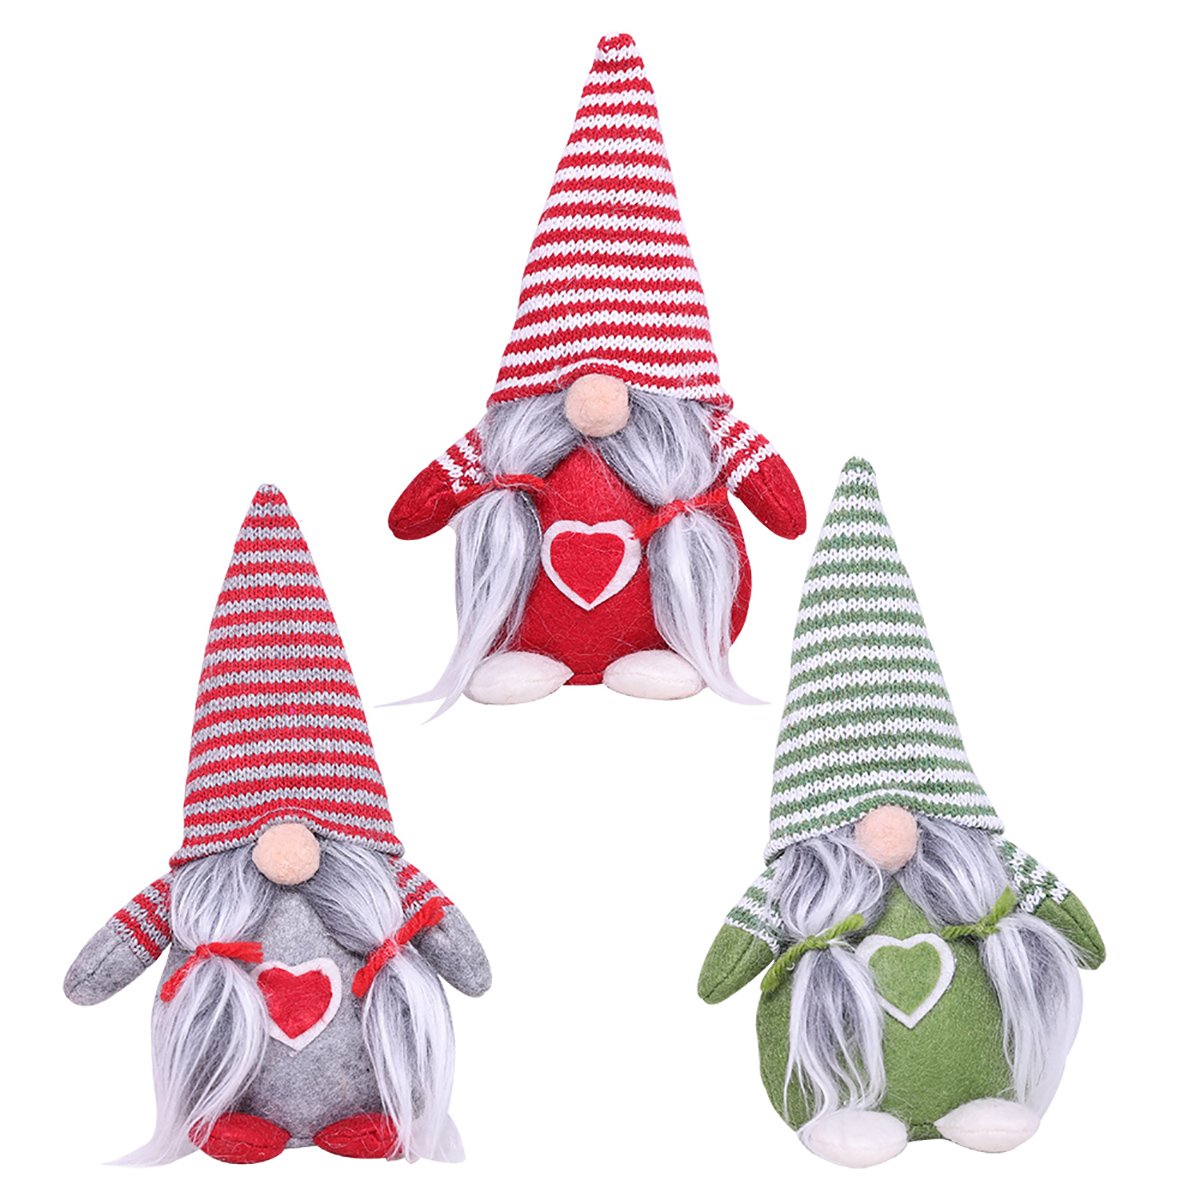 Non-Woven-Hat-With-Heart-Handmade-Gnome-Santa-Christmas-Figurines-Ornament-Holiday-Table-Decorations-1634099-8